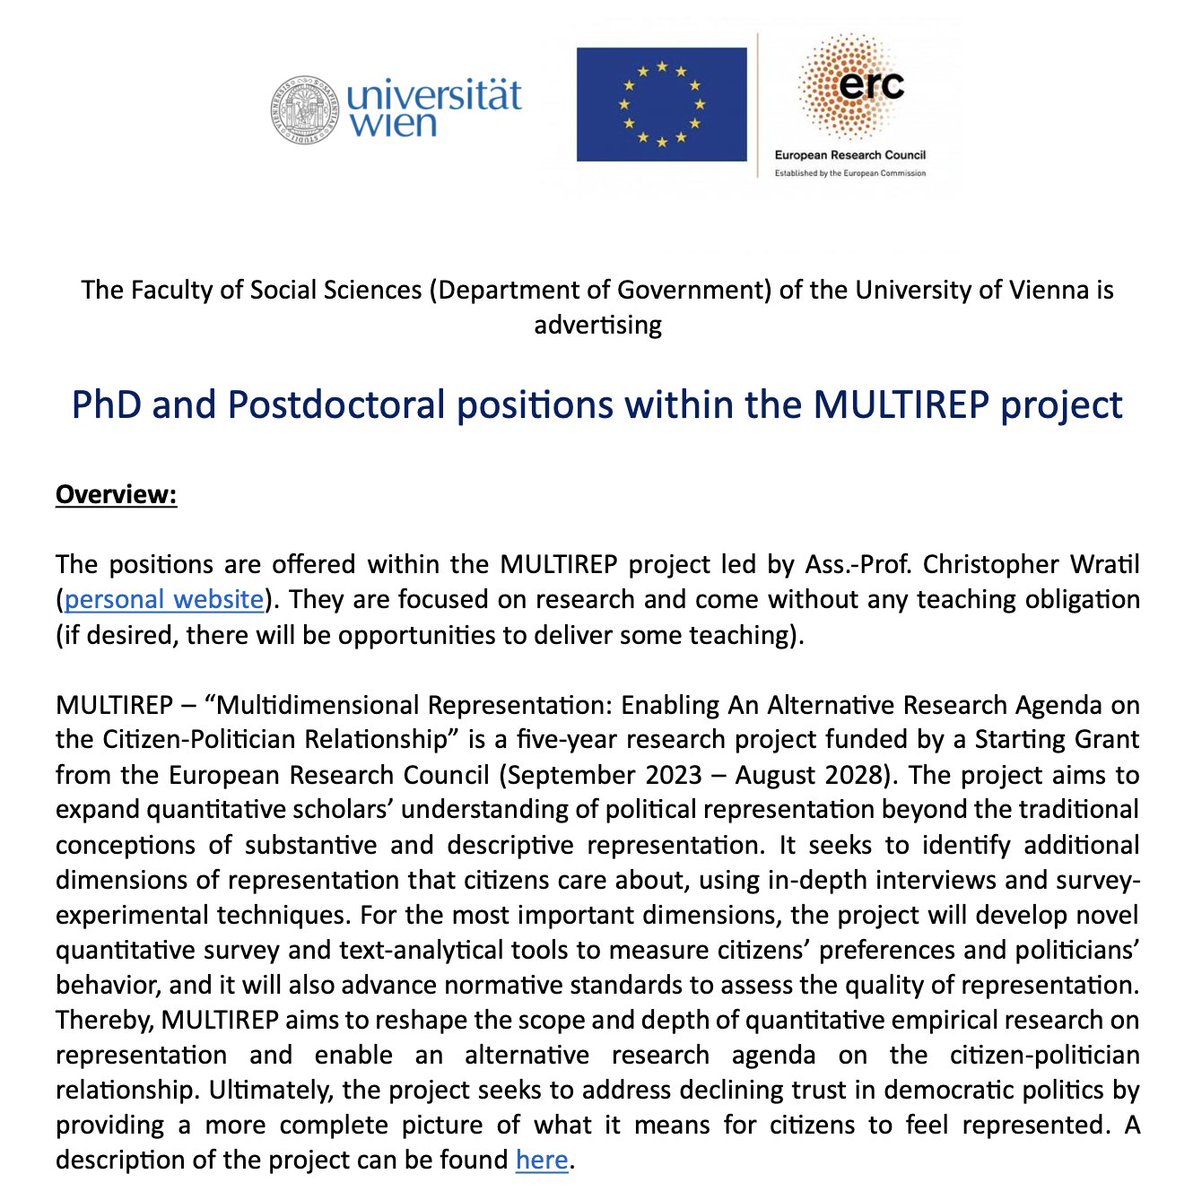 Only five days left to apply for doctoral and postdoctoral positions in the MULTIREP ERC 👇. If you are passionate about political representation and want to study it (also) beyond descriptive and substantive representation, apply and join us at the University of Vienna!